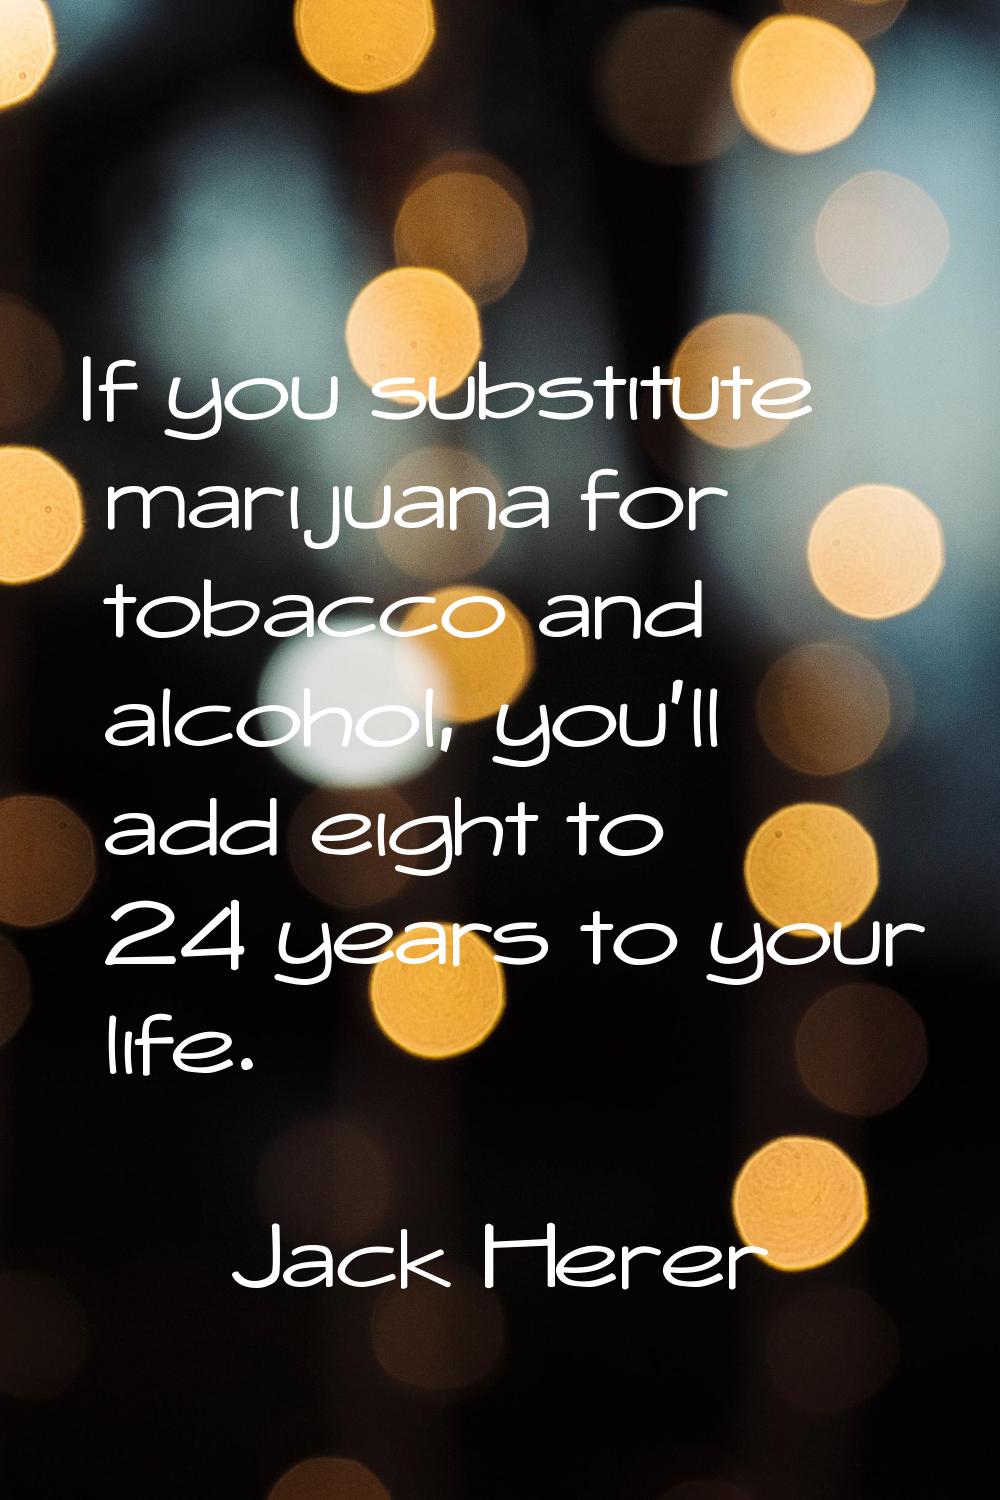 If you substitute marijuana for tobacco and alcohol, you'll add eight to 24 years to your life.